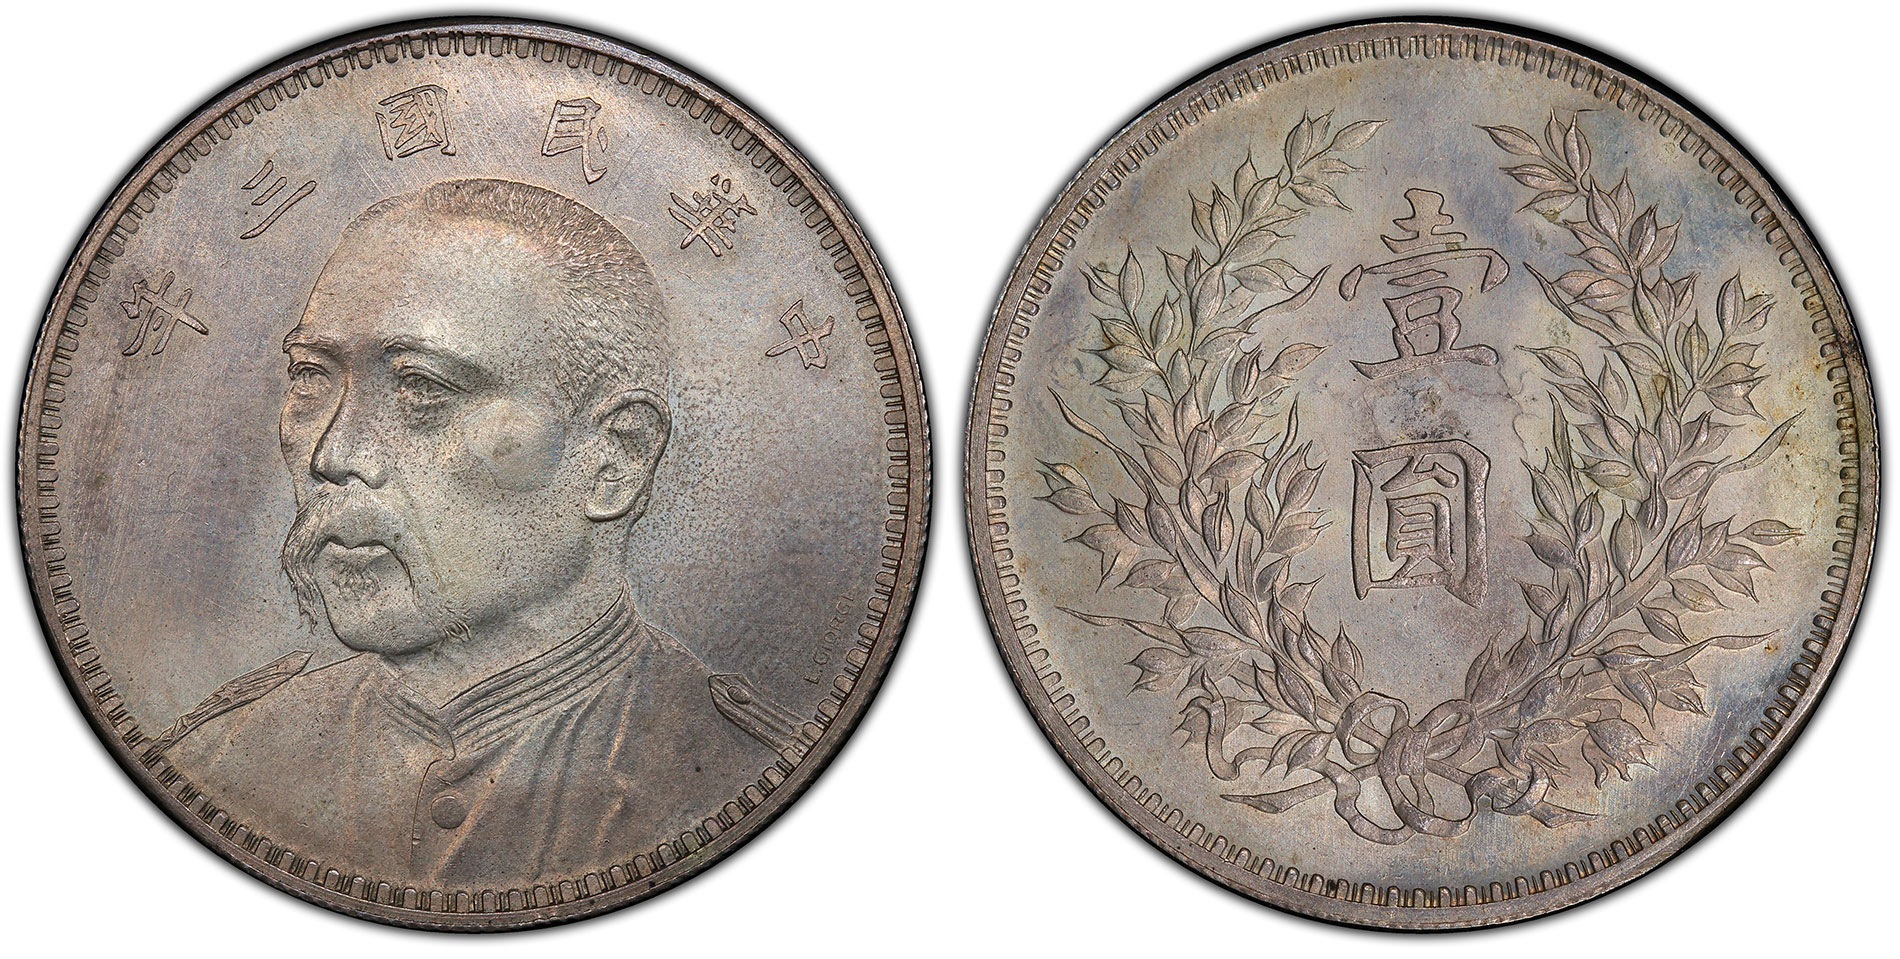 Chinese & Other World Coins Shine in Hong Kong Auction